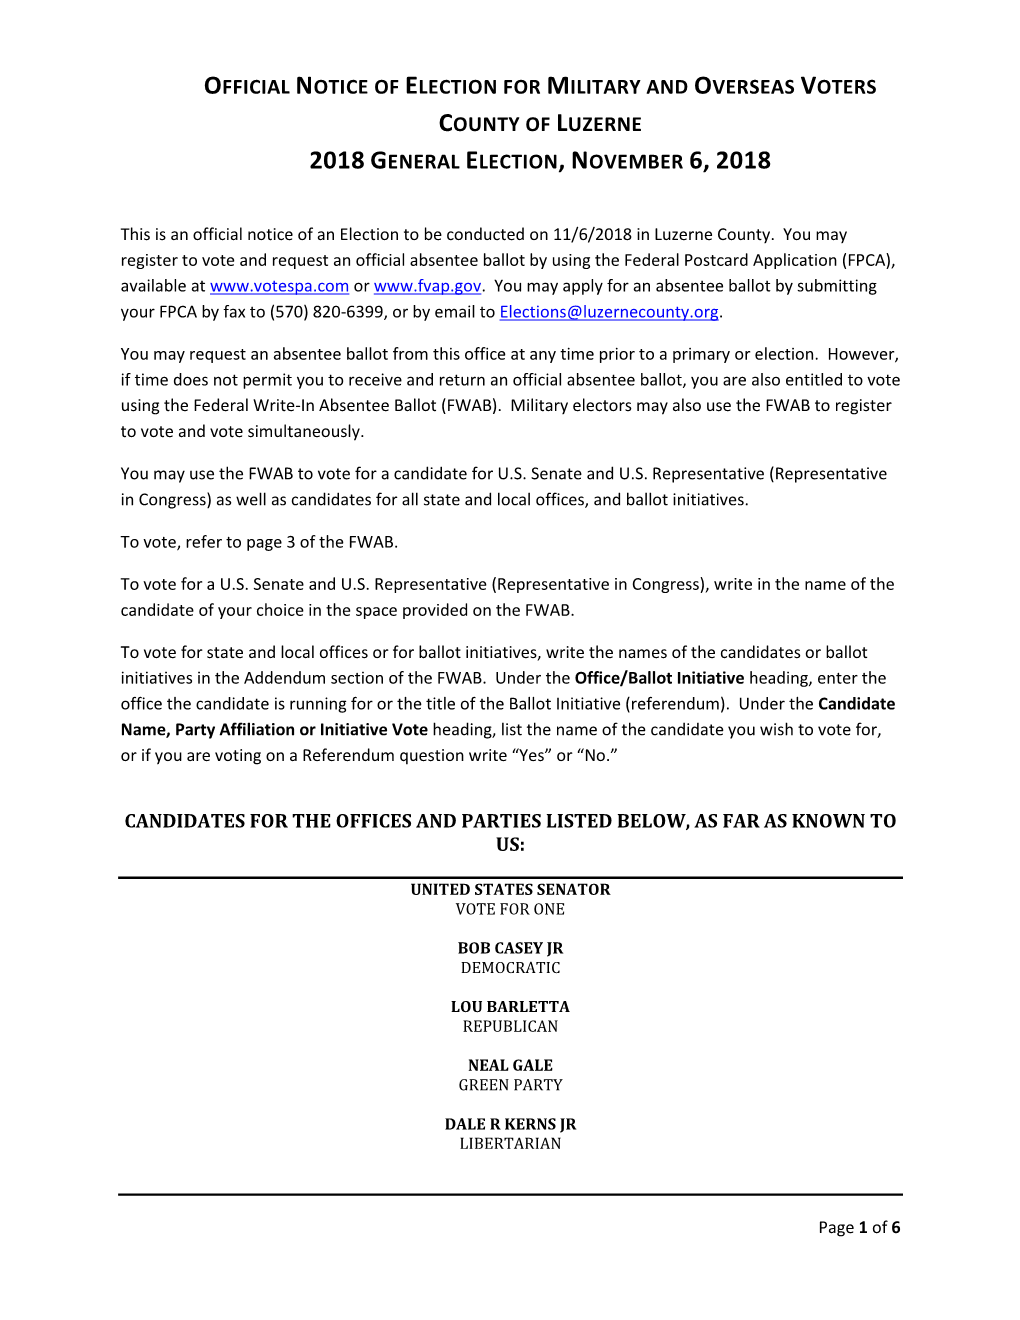 Official Notice of Election for Military and Overseas Voters County of Luzerne 2018 General Election, November 6, 2018